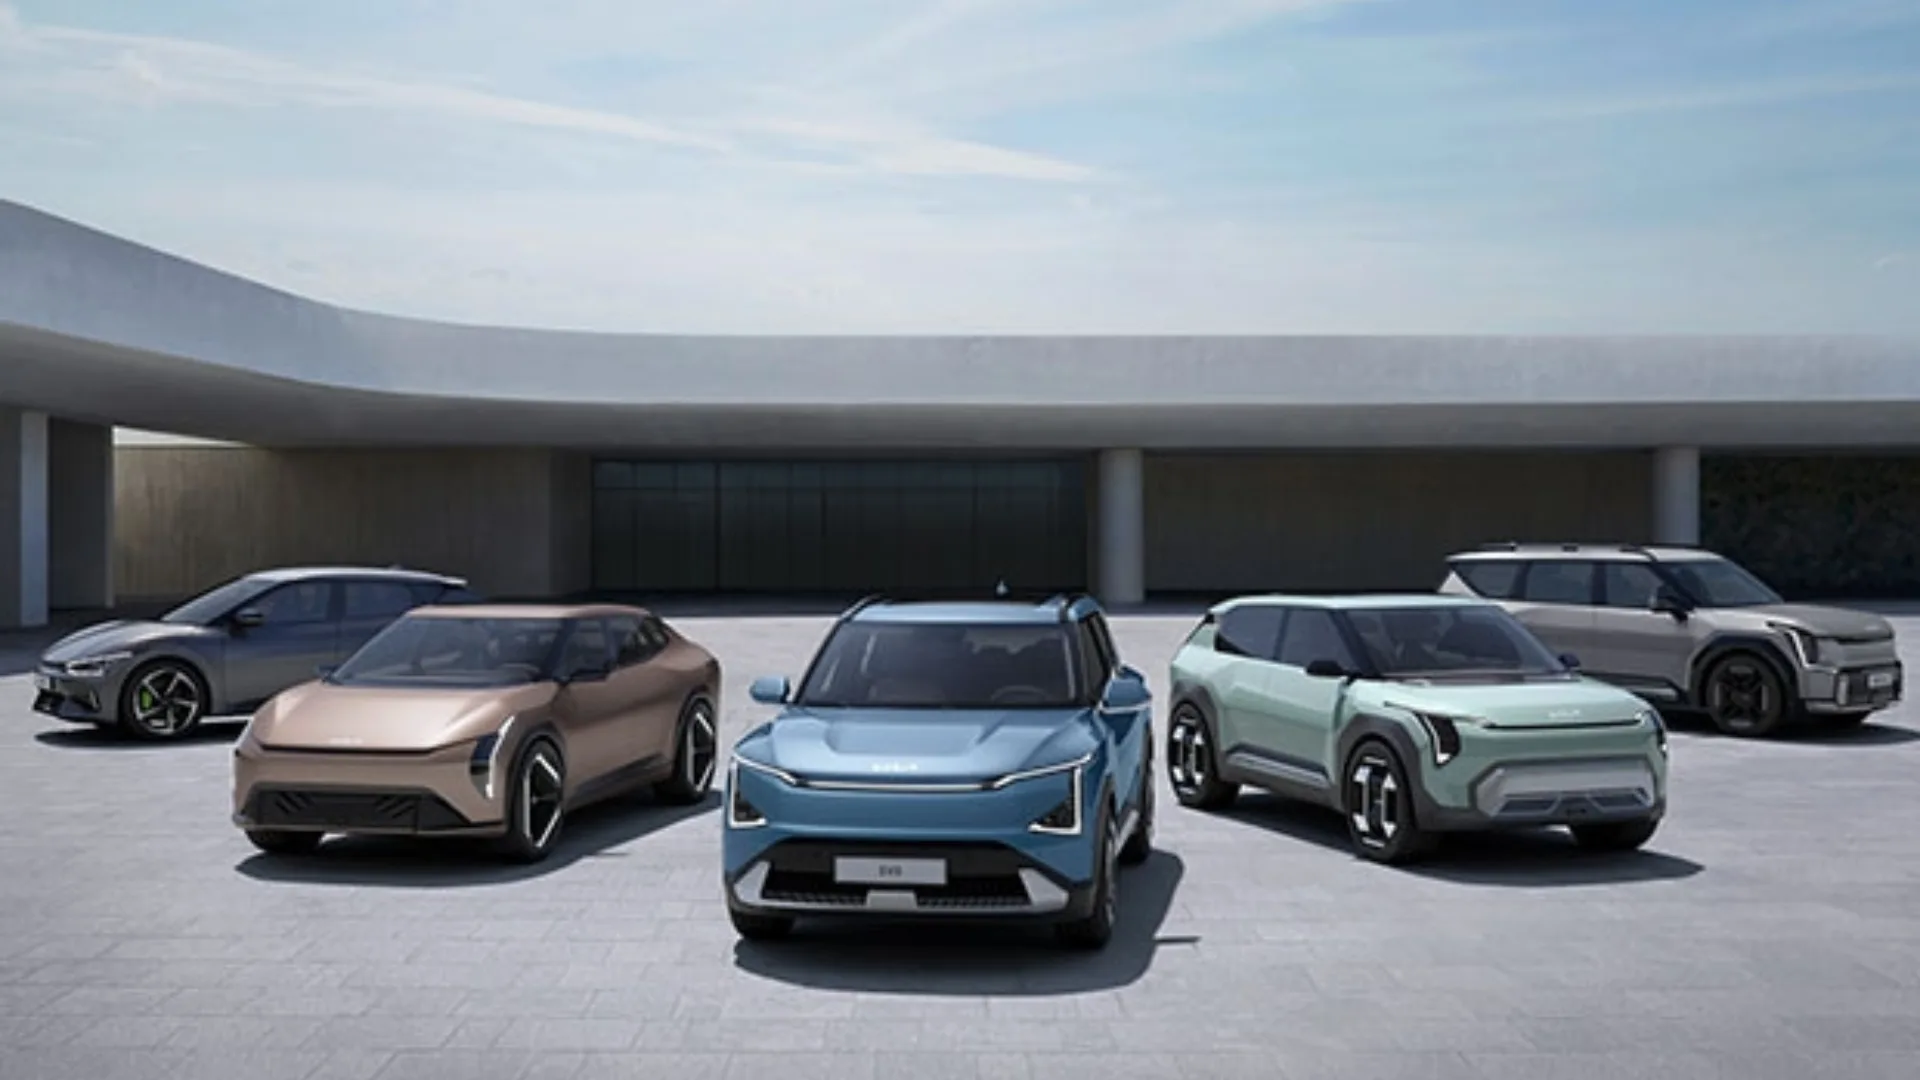 Kia's EV Day introduces three exciting electric vehicles for the future.